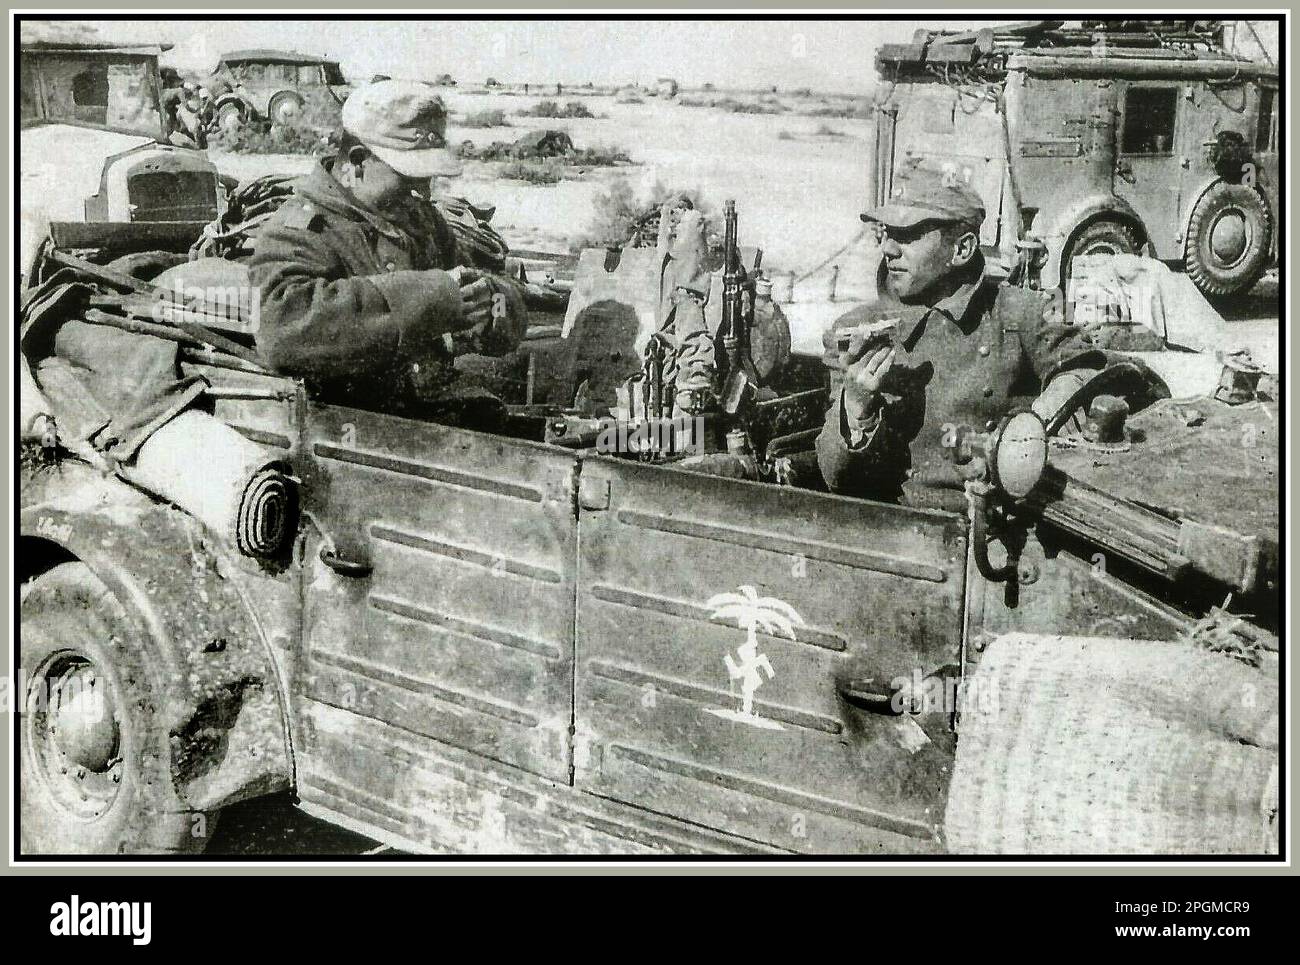 Afrika Corps WW2 North Africa 1940s Nazi Germany 21st Panzer Division under  Desert Fox Field Marshall Erwin Rommel, Wehrmacht Army Soldiers eating rations in their Kubelwagon. 'DAK' Nazi Swastika stencil on the door. World War II Second World War Stock Photo